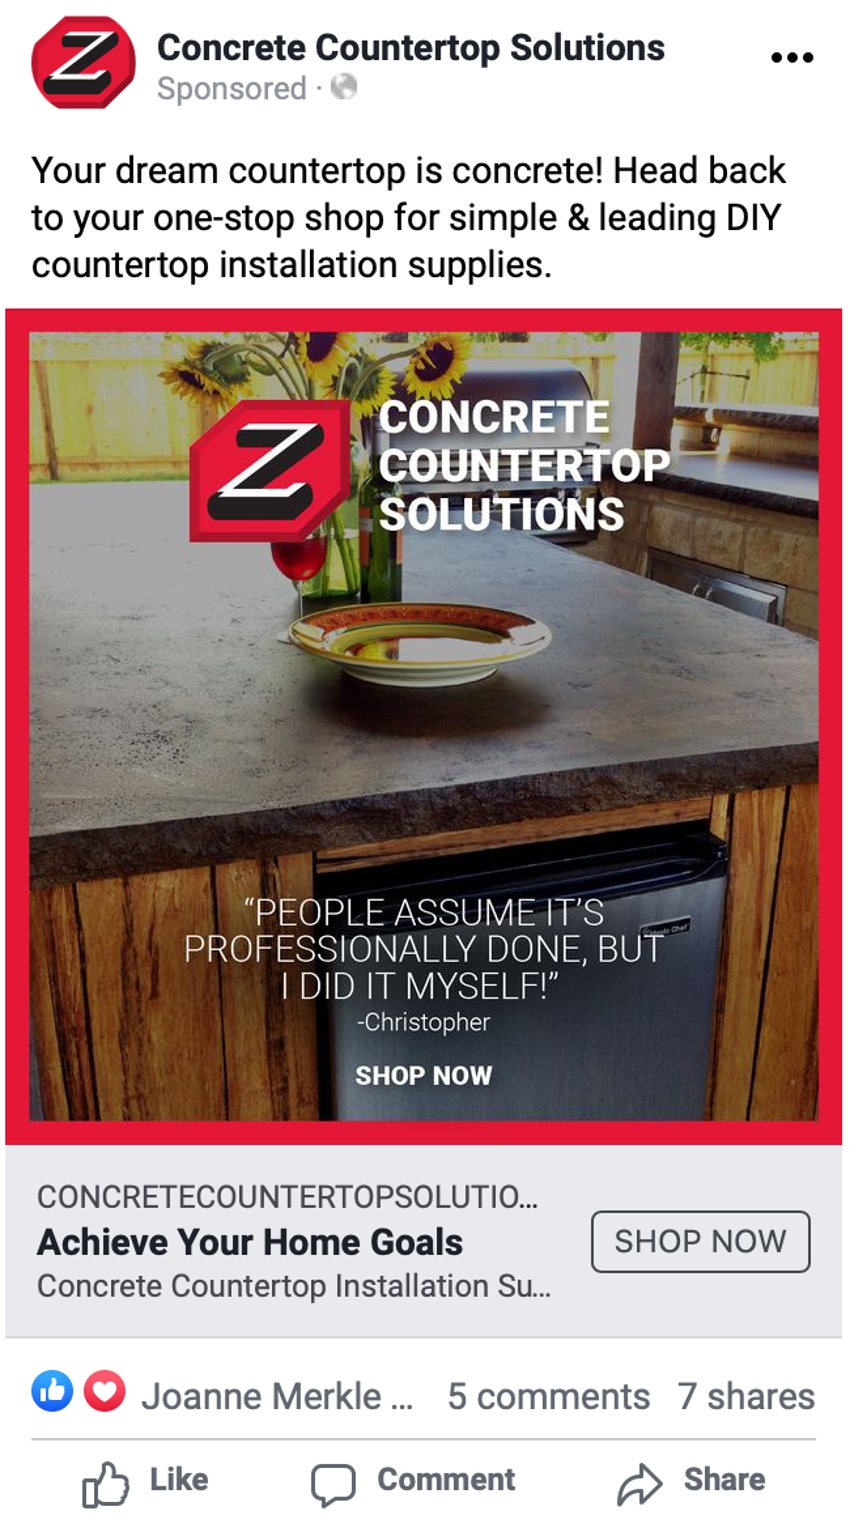 i-make-13-2m-year-selling-concrete-countertops-for-diy-ers